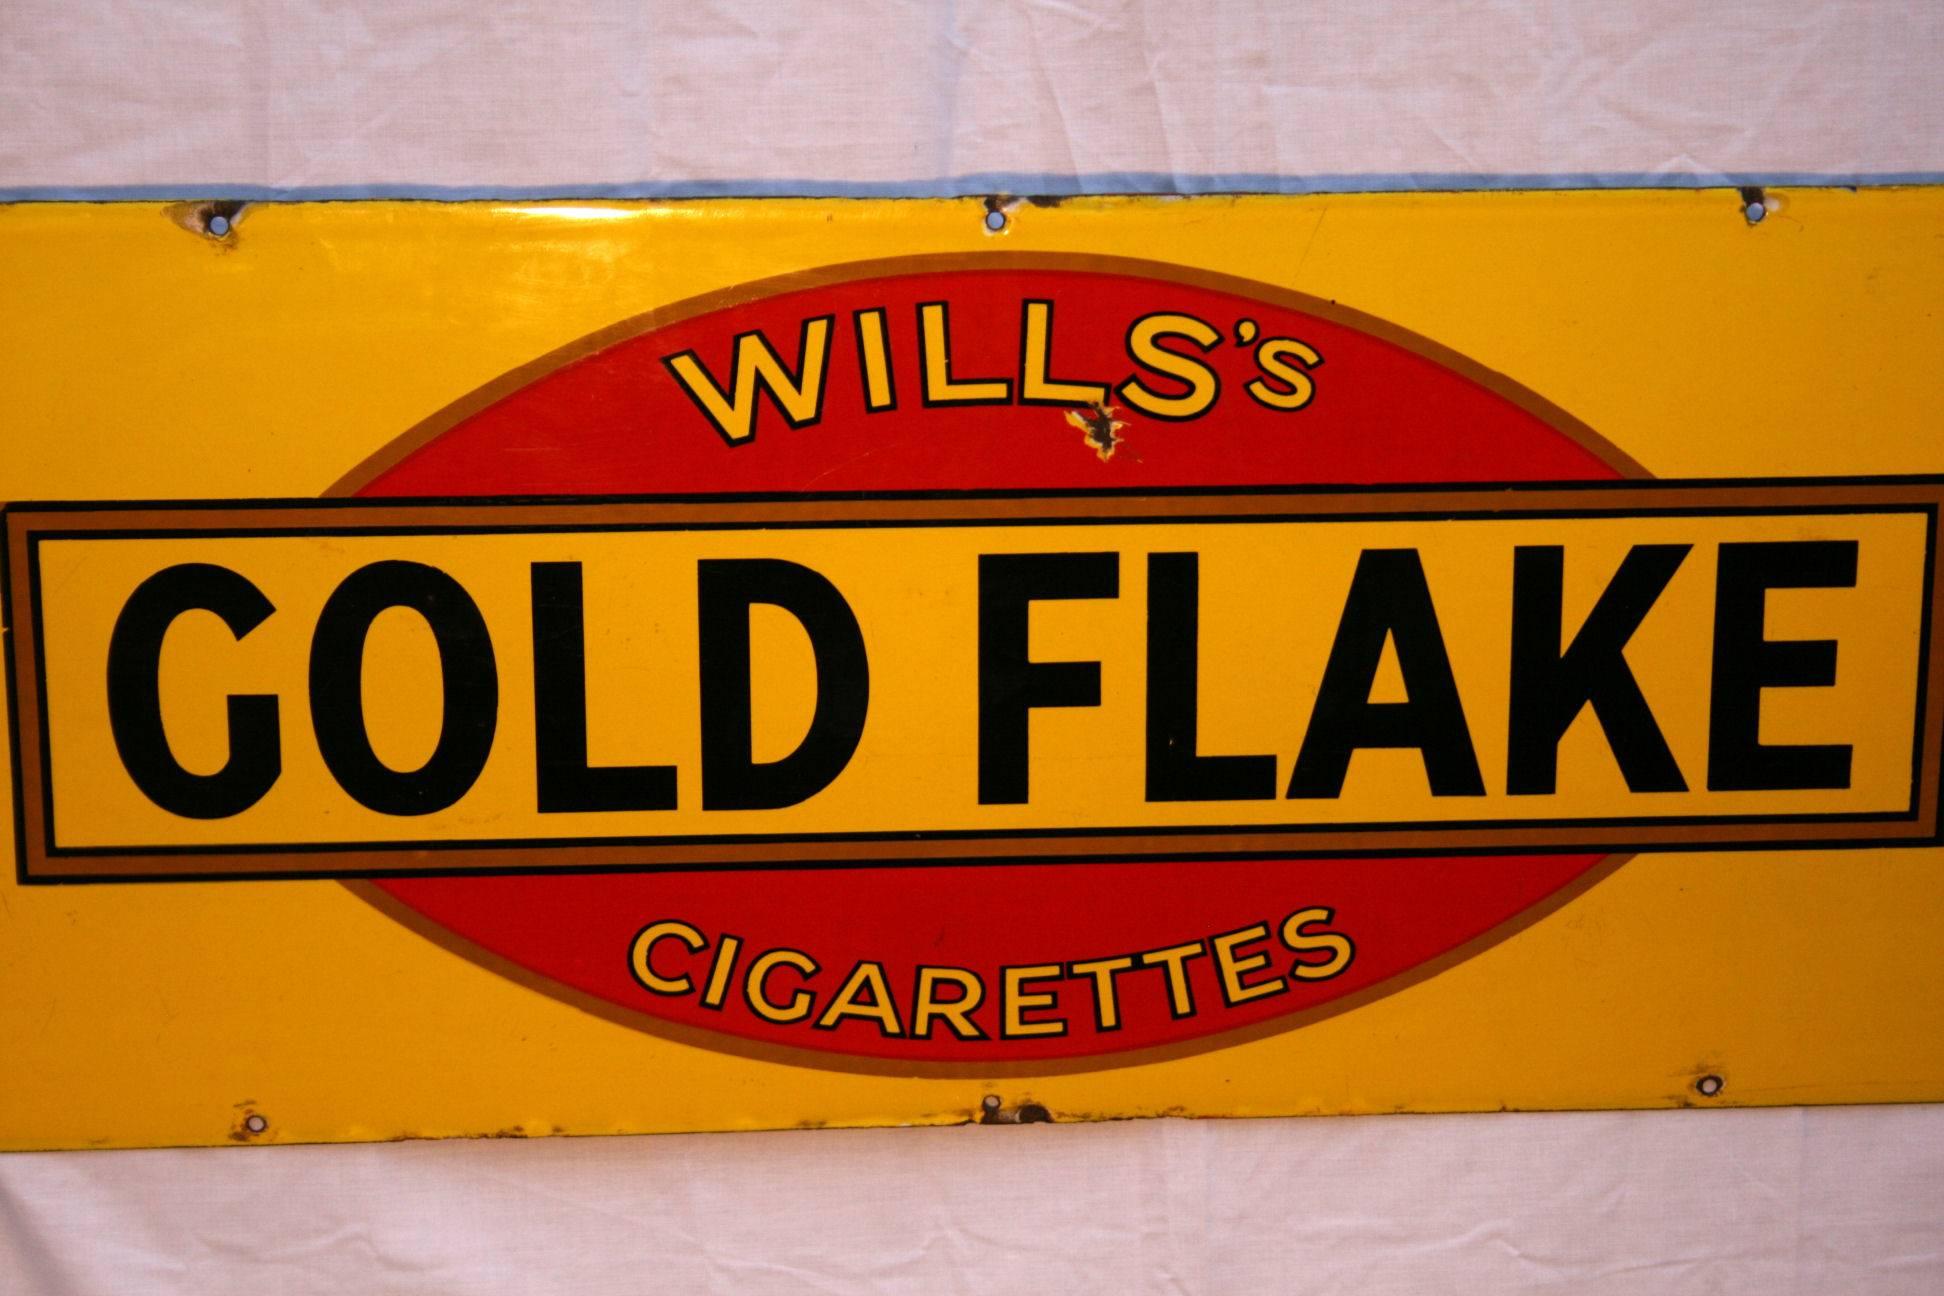 Original Wills Gold Flake advertising enamel sign
Old English railway station advertising sign for Wills gold flake probably early 1900s.

Size: 183 cm long x 38 cm high.
In good condition for age but with wear and tear which only adds to its